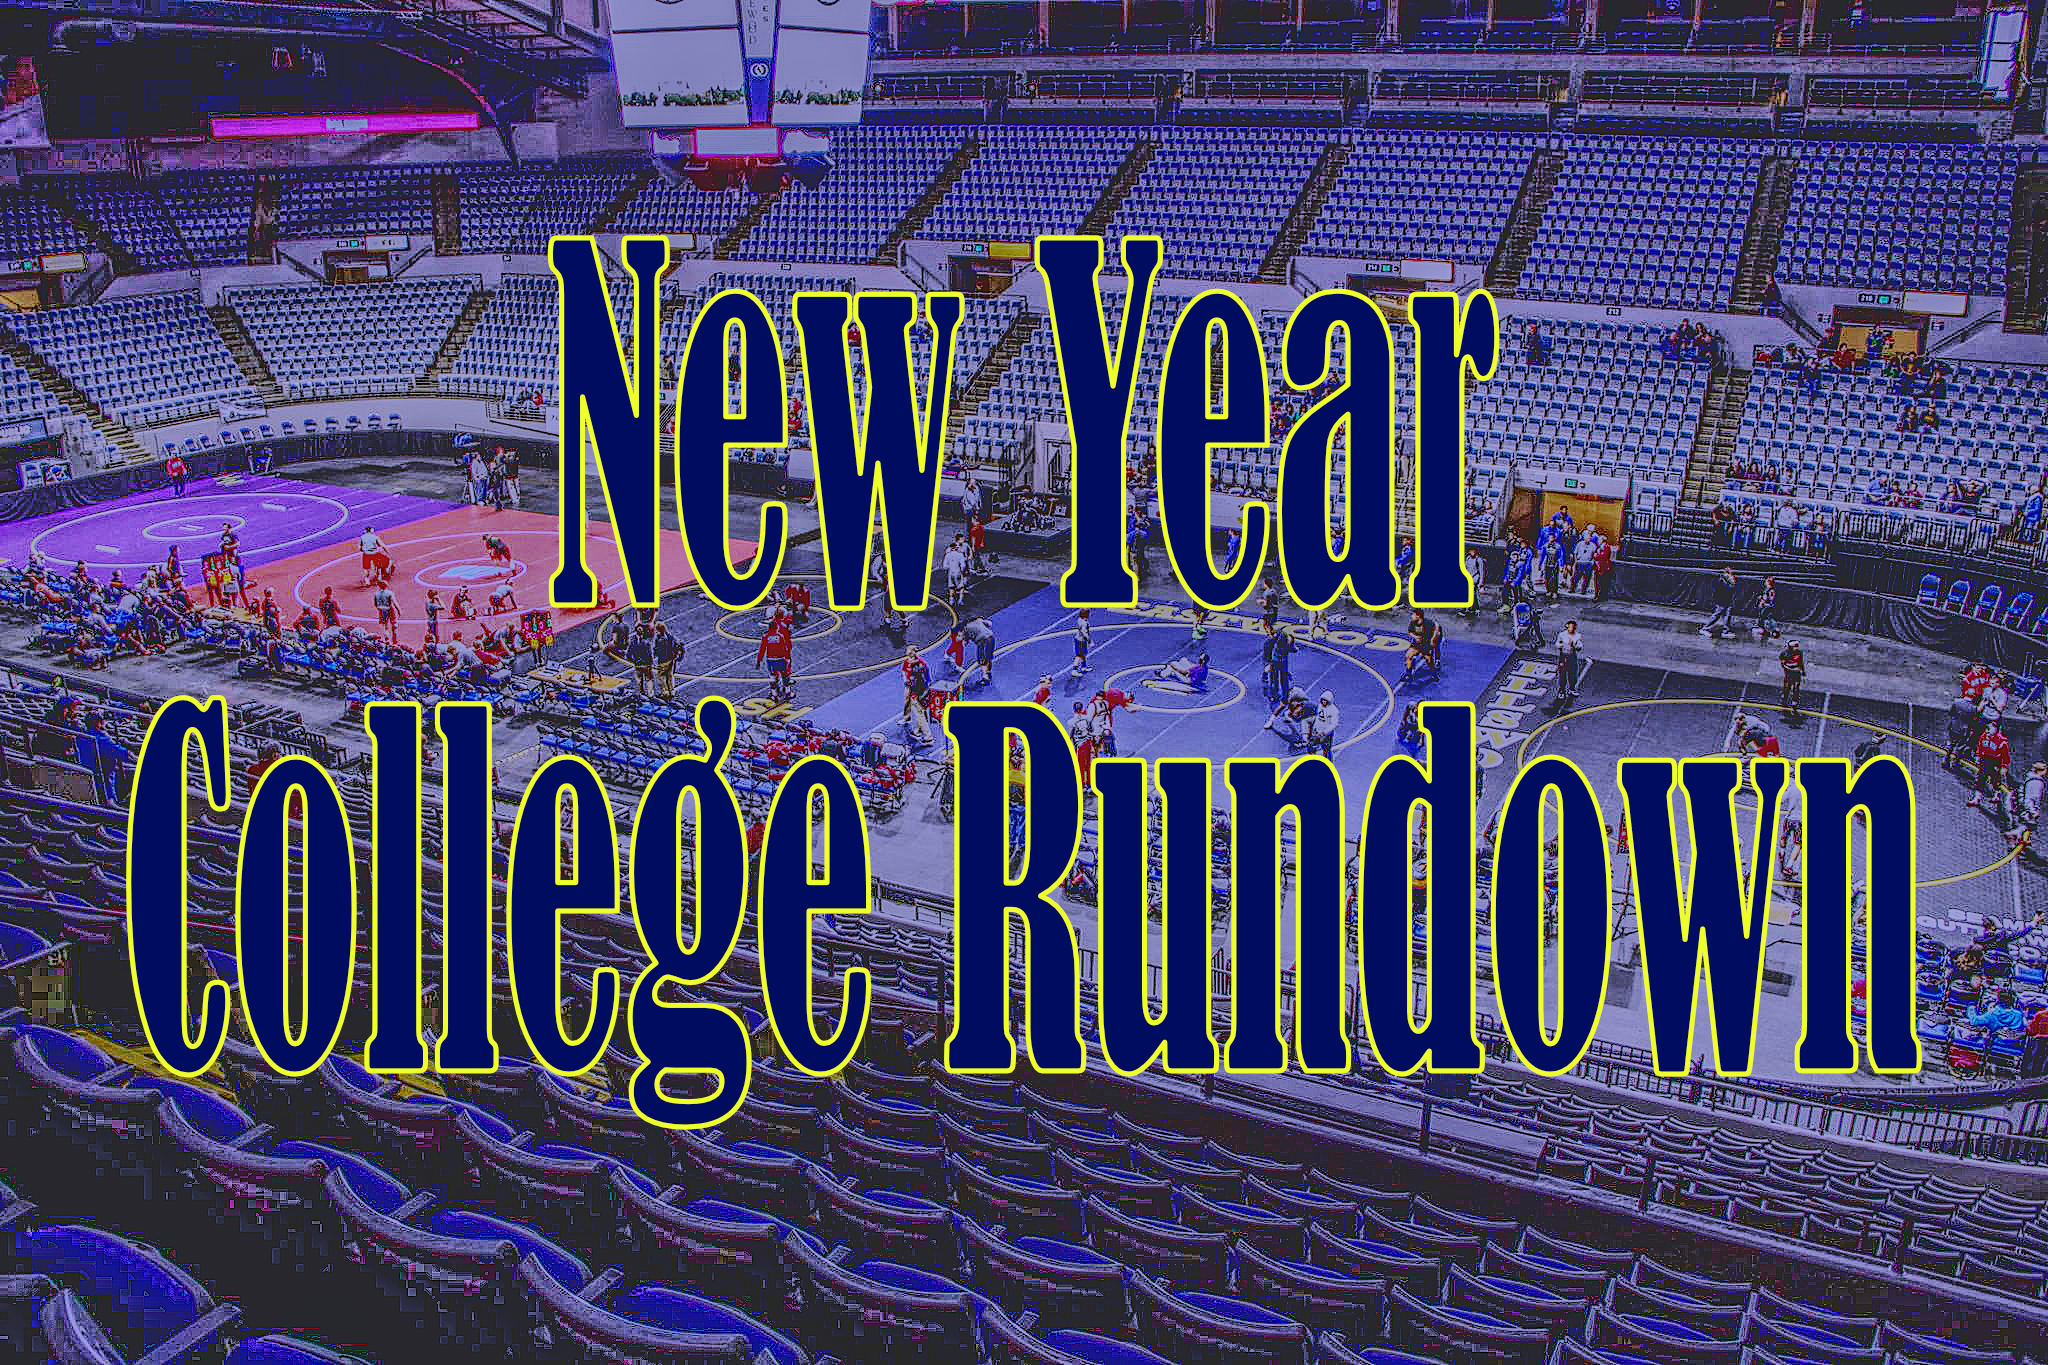 More information about "New Year College Rundown"